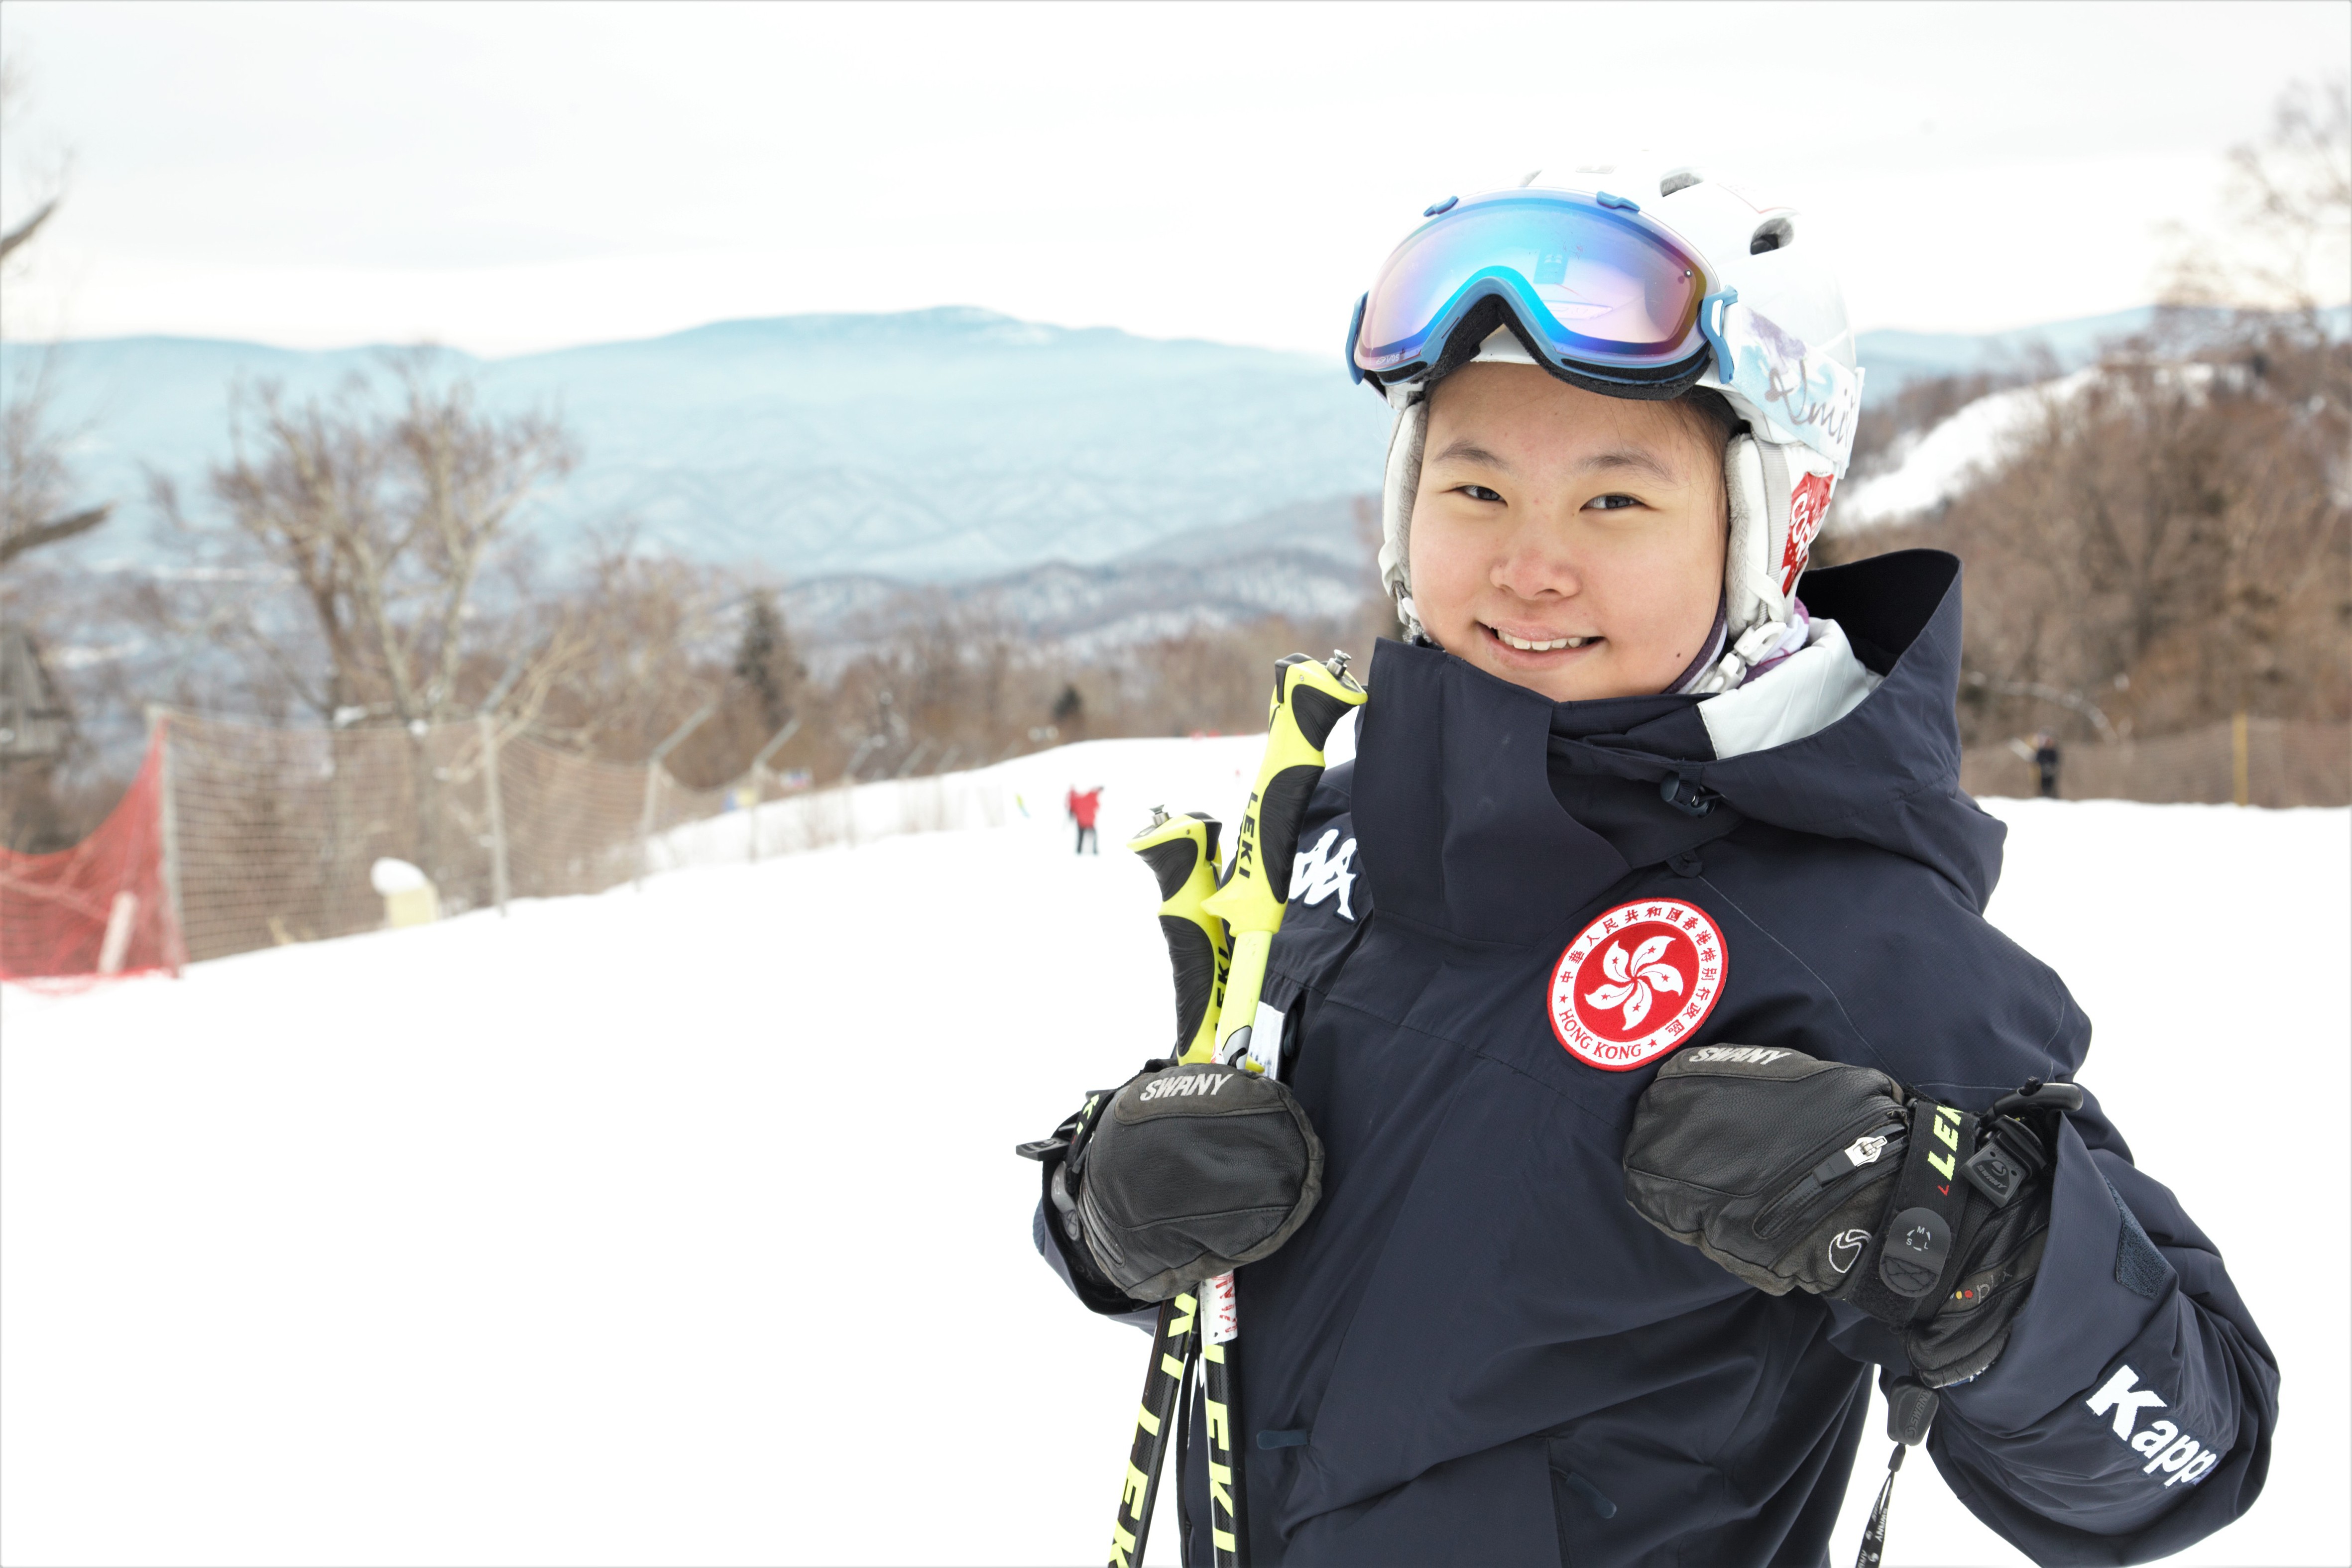 Audrey is representing Hong Kong at the Winter Youth Olympic Games in Switzerland.